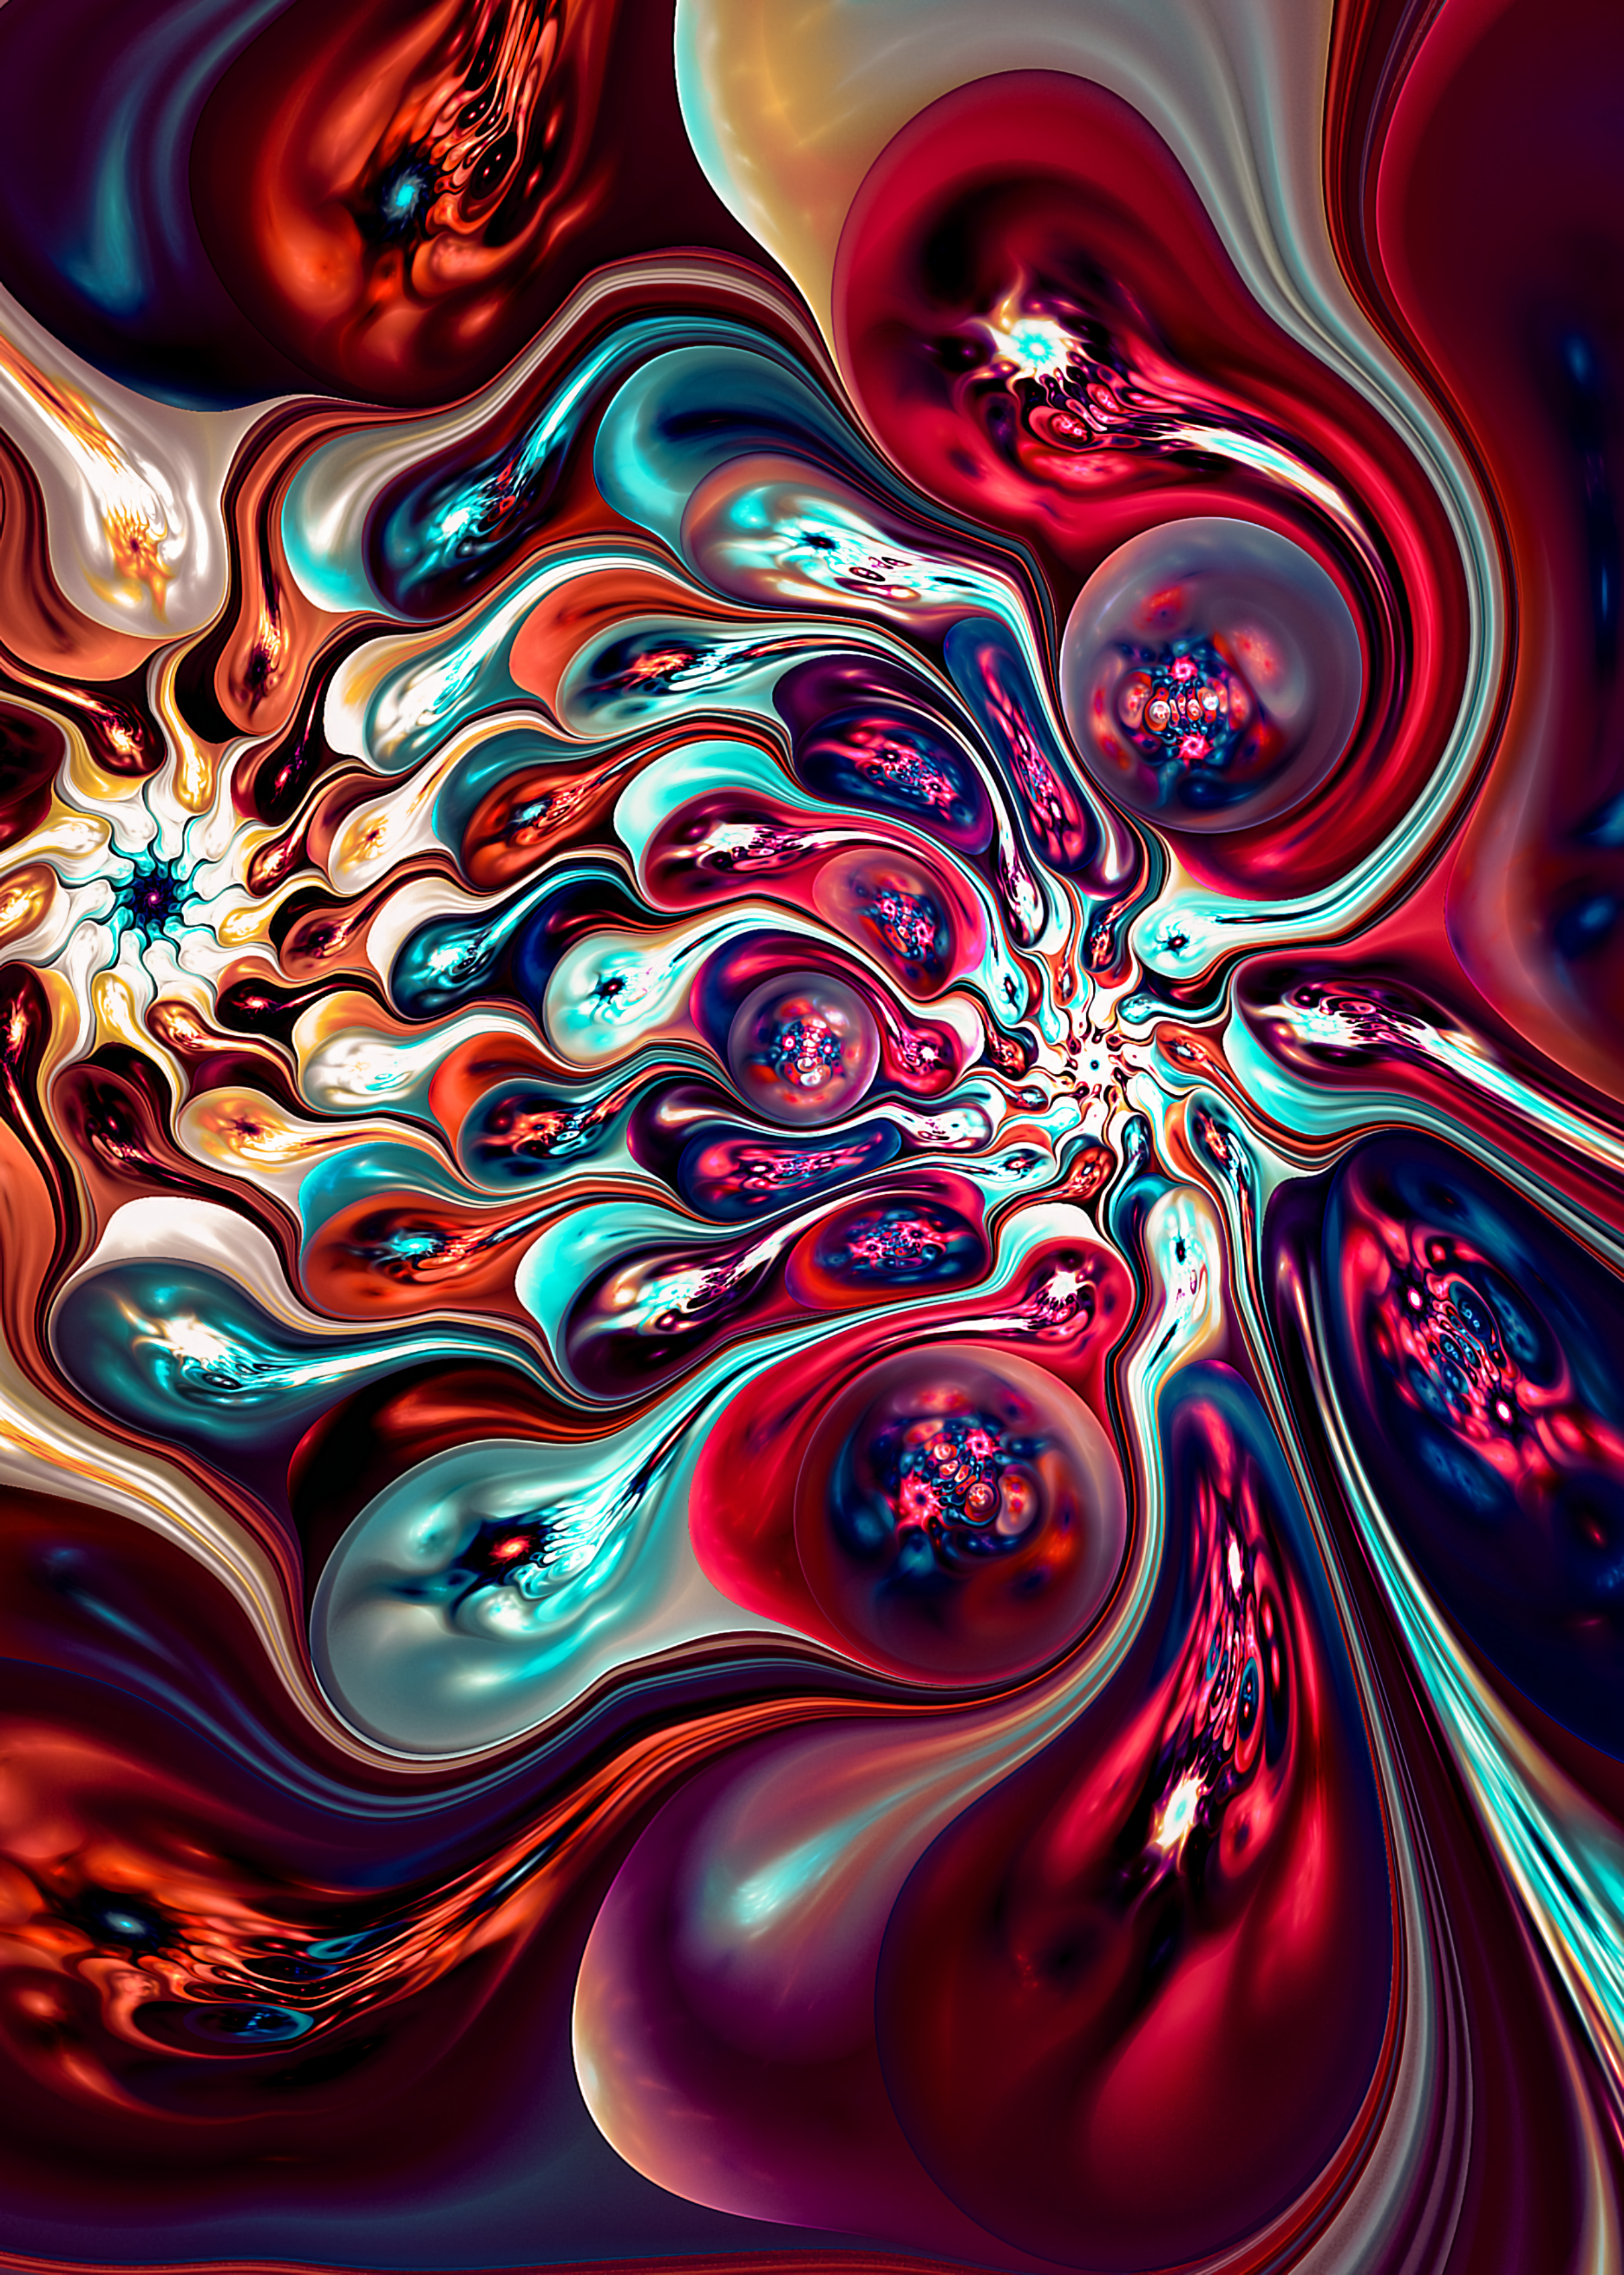 brilliance, abstract, patterns, circles, shine, bright, multicolored, motley, paint, form, forms, ovals Phone Background